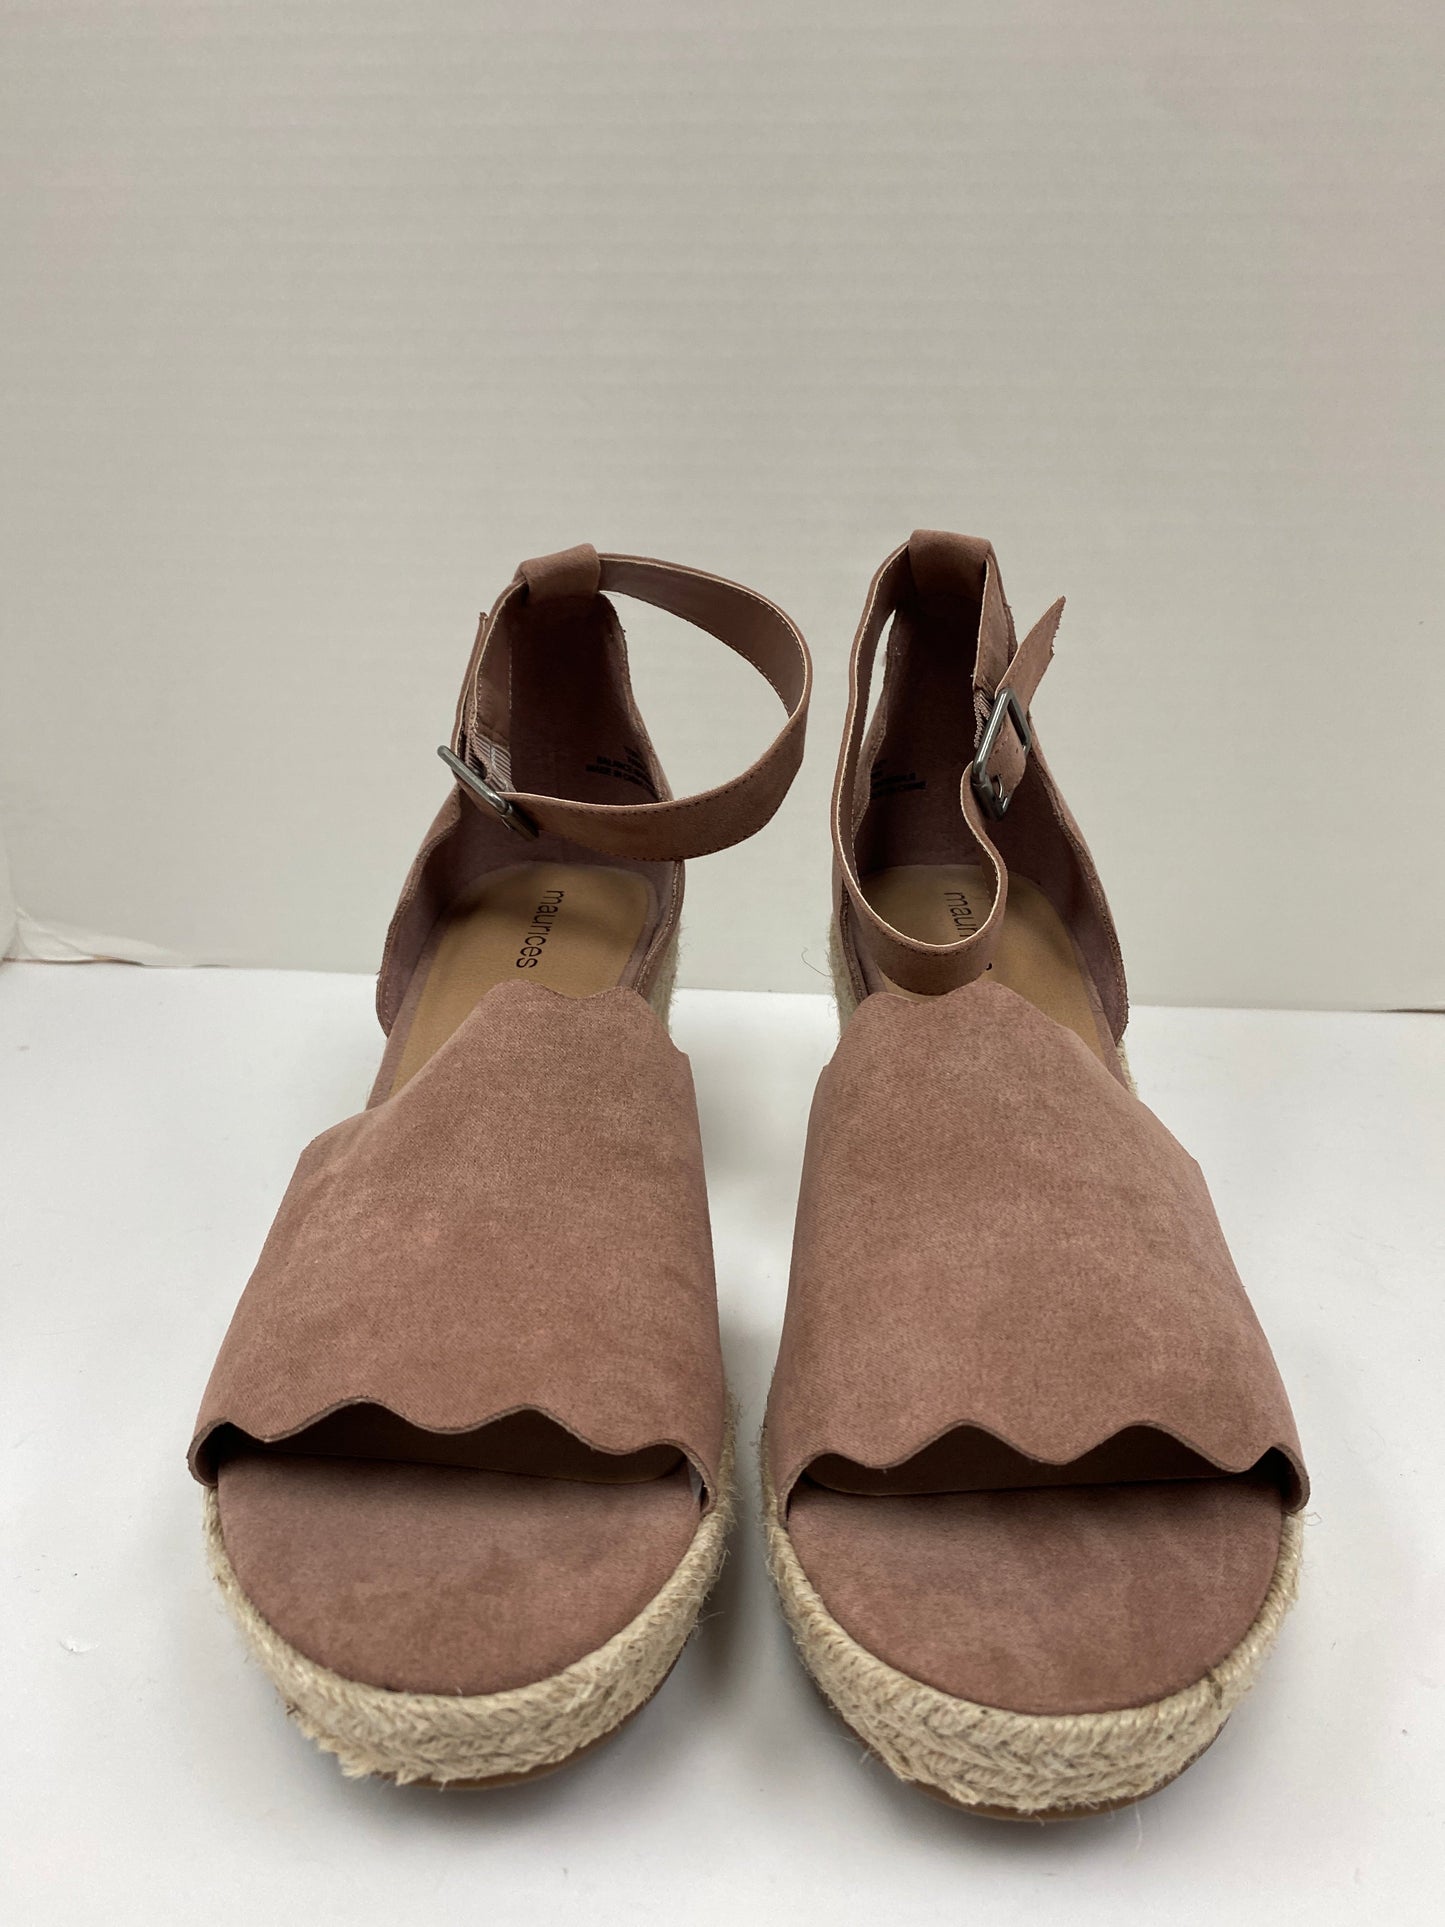 Sandals Heels Platform By Maurices  Size: 11